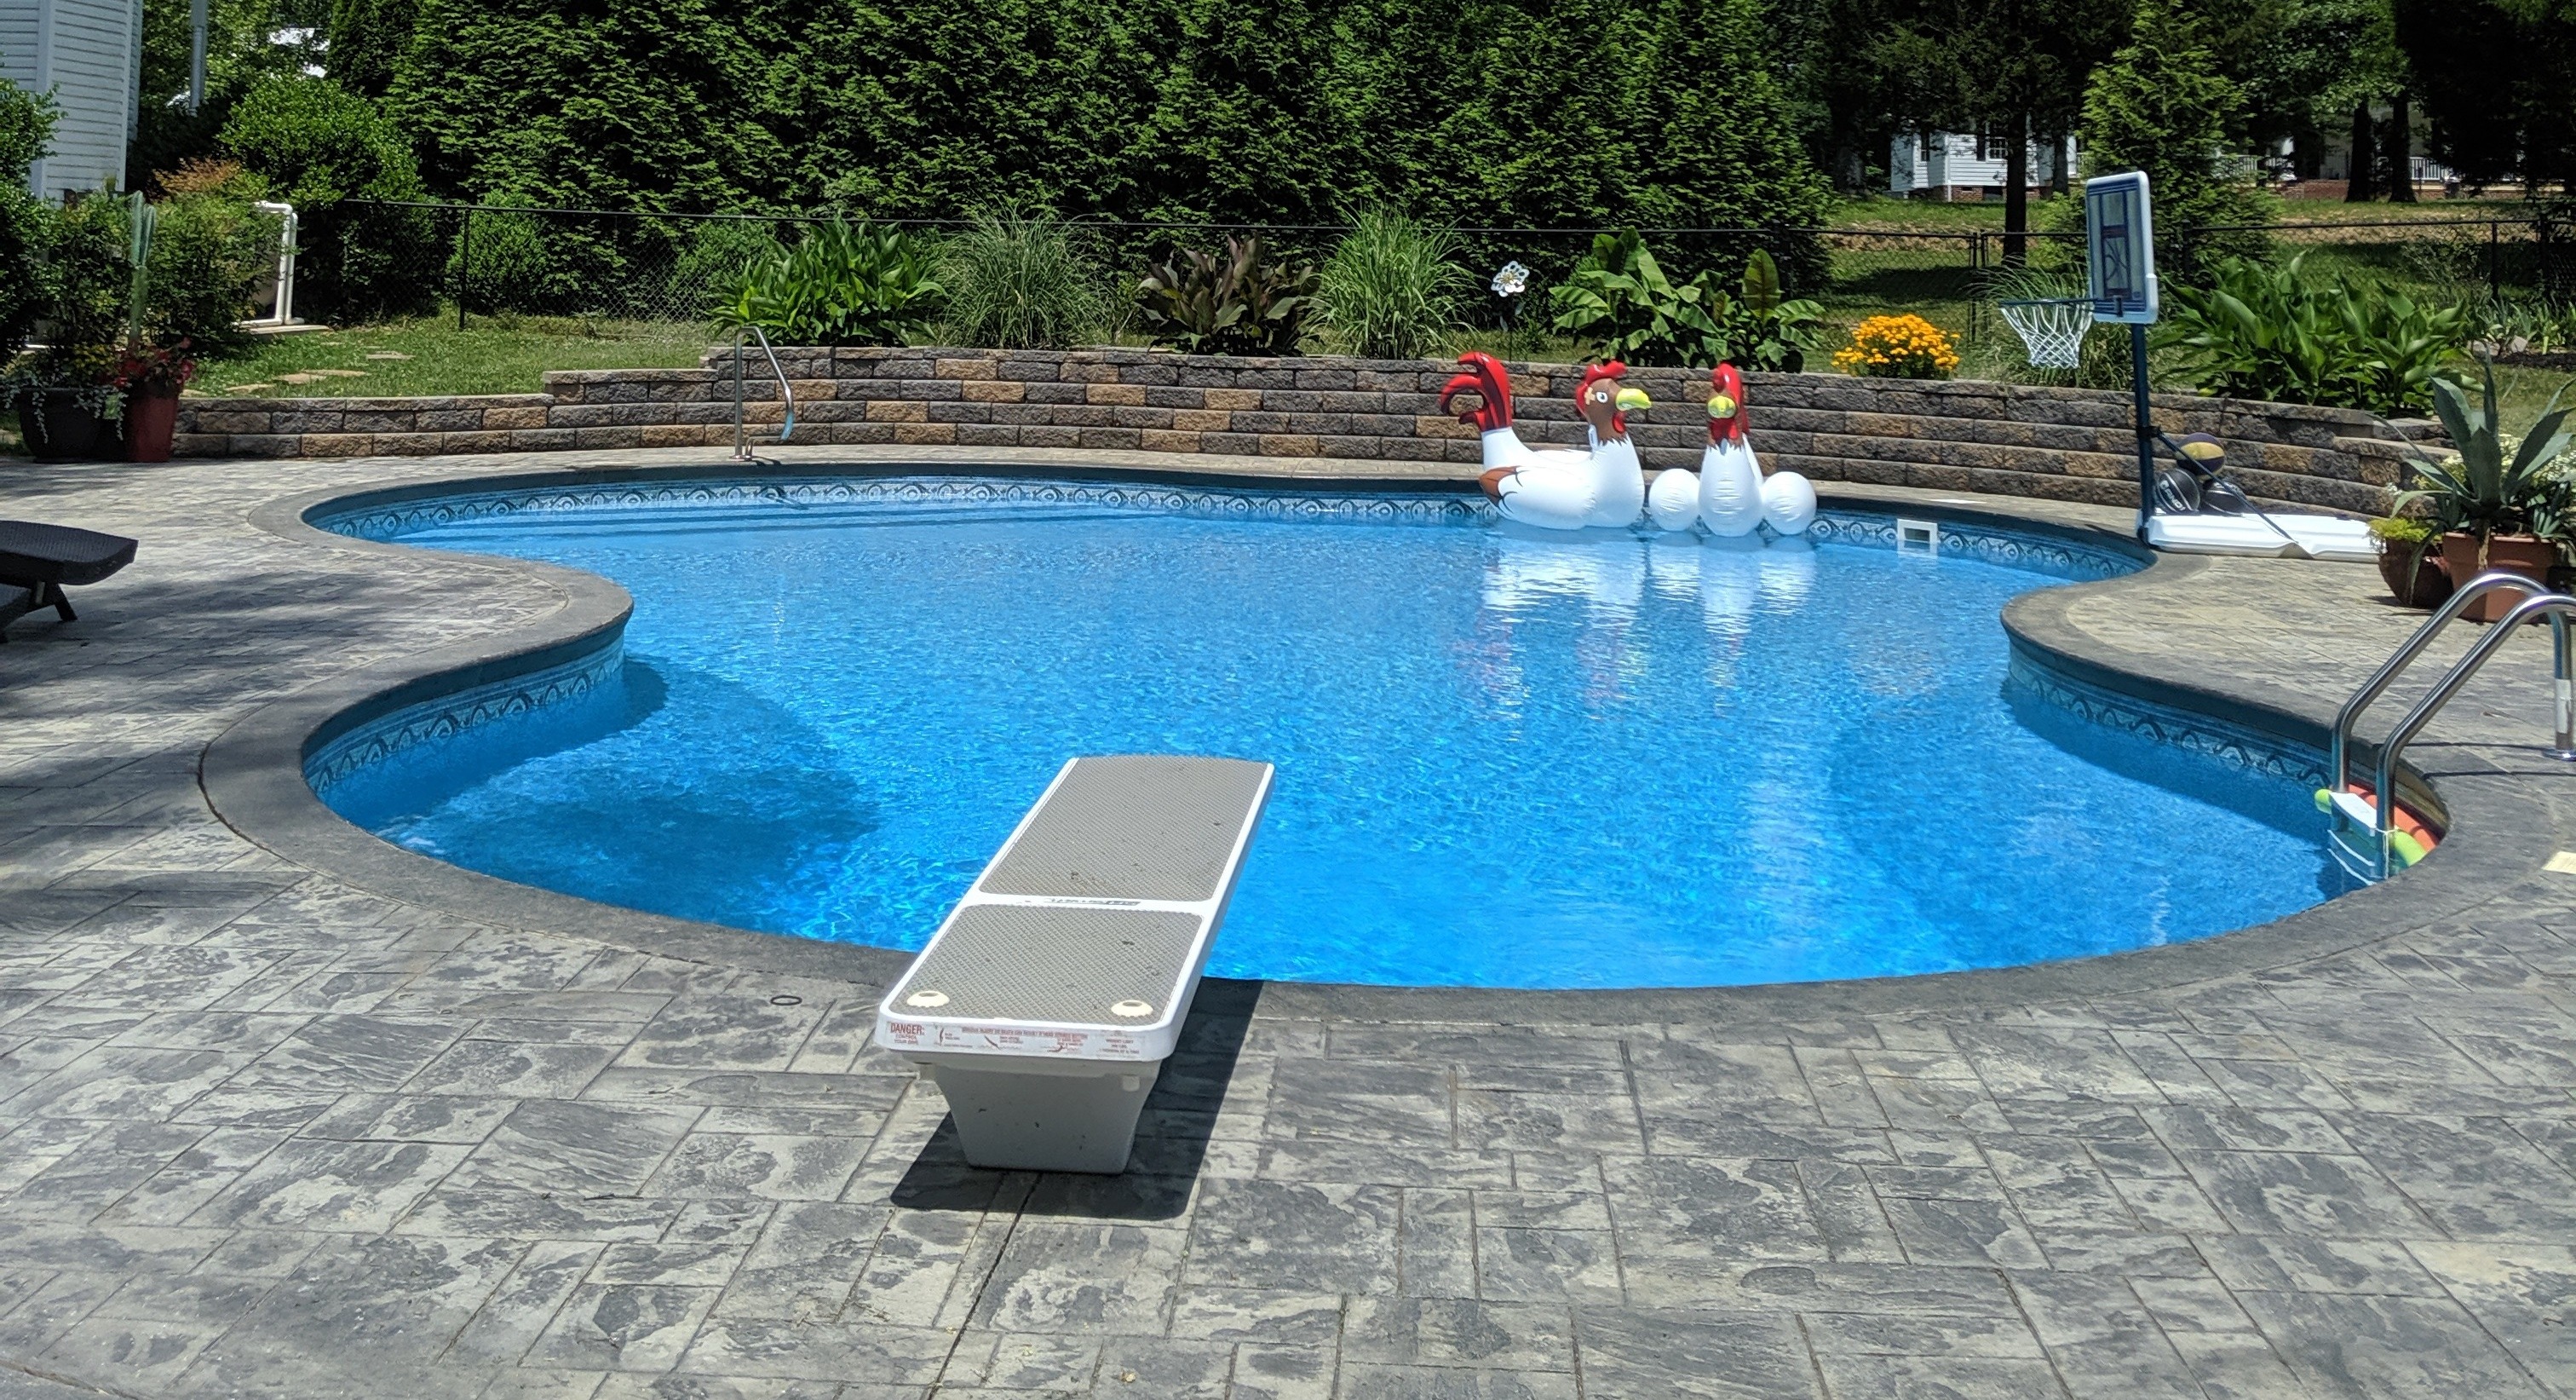 How To Safely Design A Diving Board Pool, Inground Pool Diving Board Base